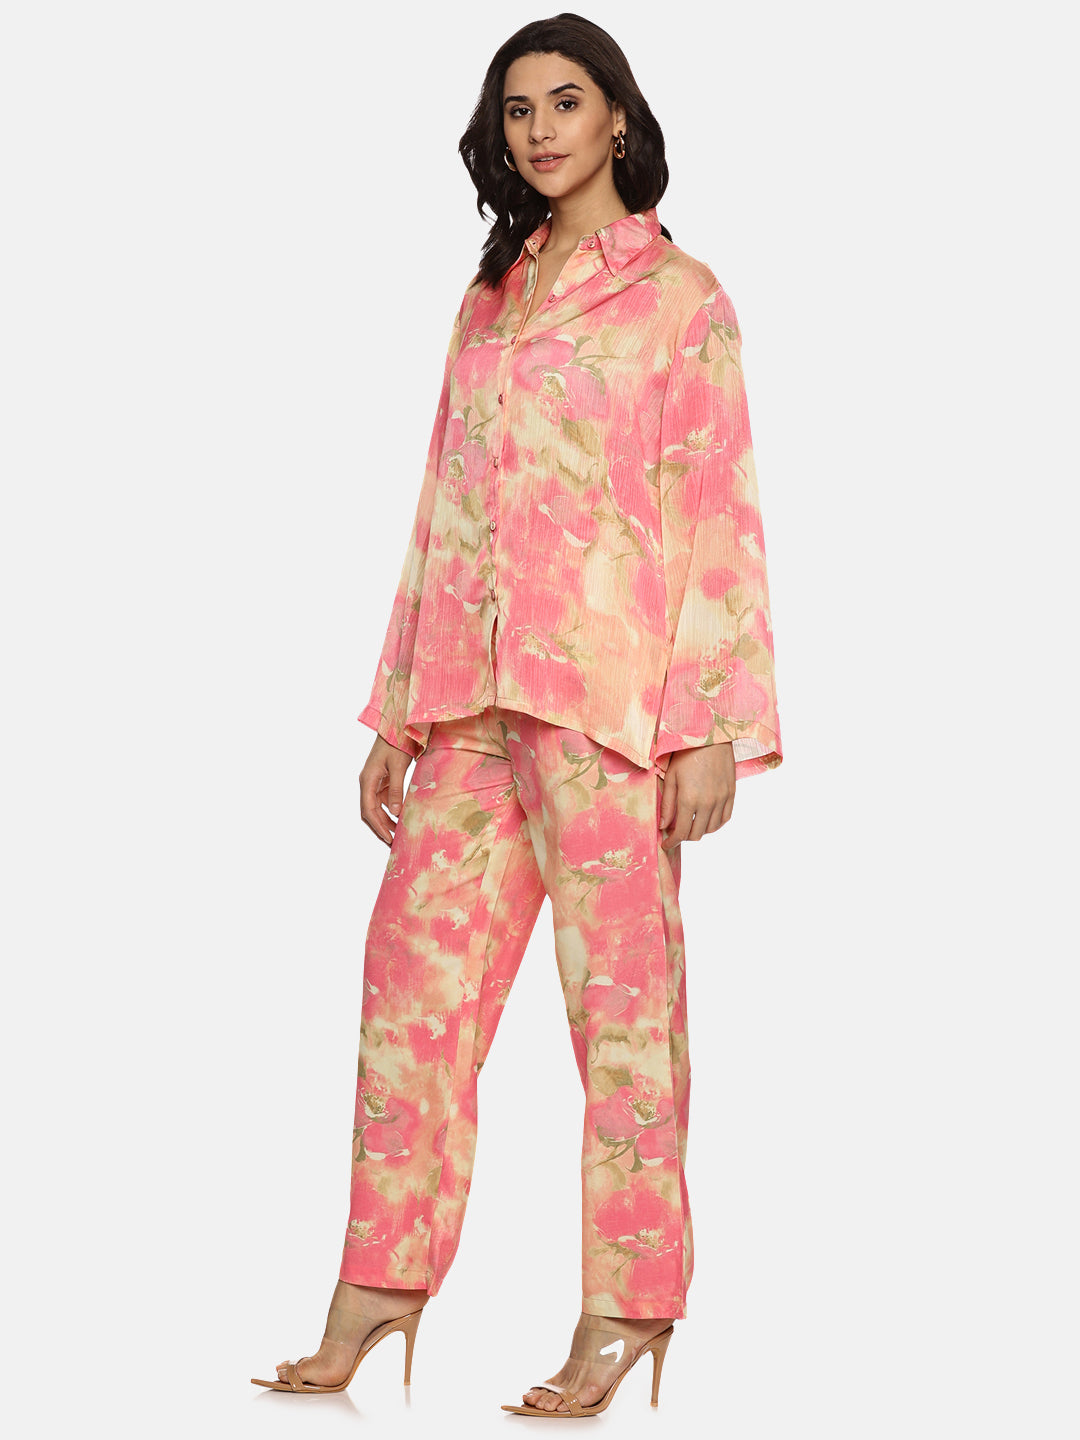 Buy Pink Printed Floral Chiffon Satin Fabric | Satin Coord Set Online In India